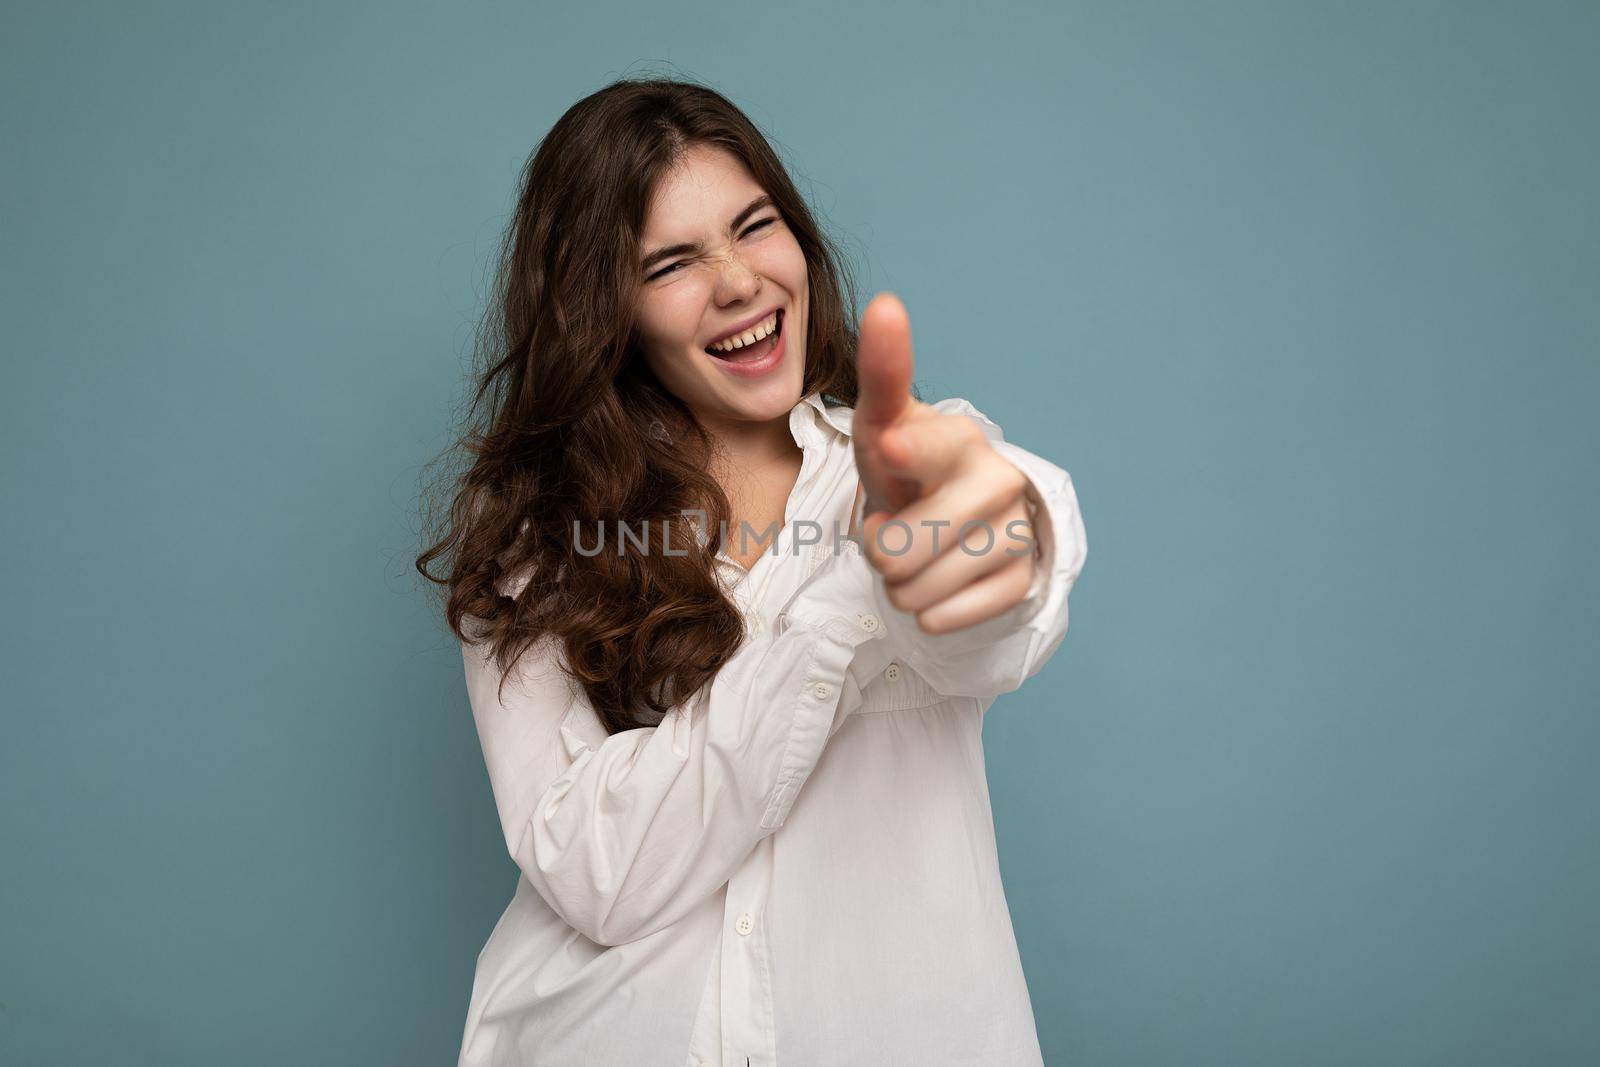 Portrait of young positive happy joyful attractive curly brunette woman with sincere emotions wearing casual white shirt isolated on blue background with empty space and pointing at camera.